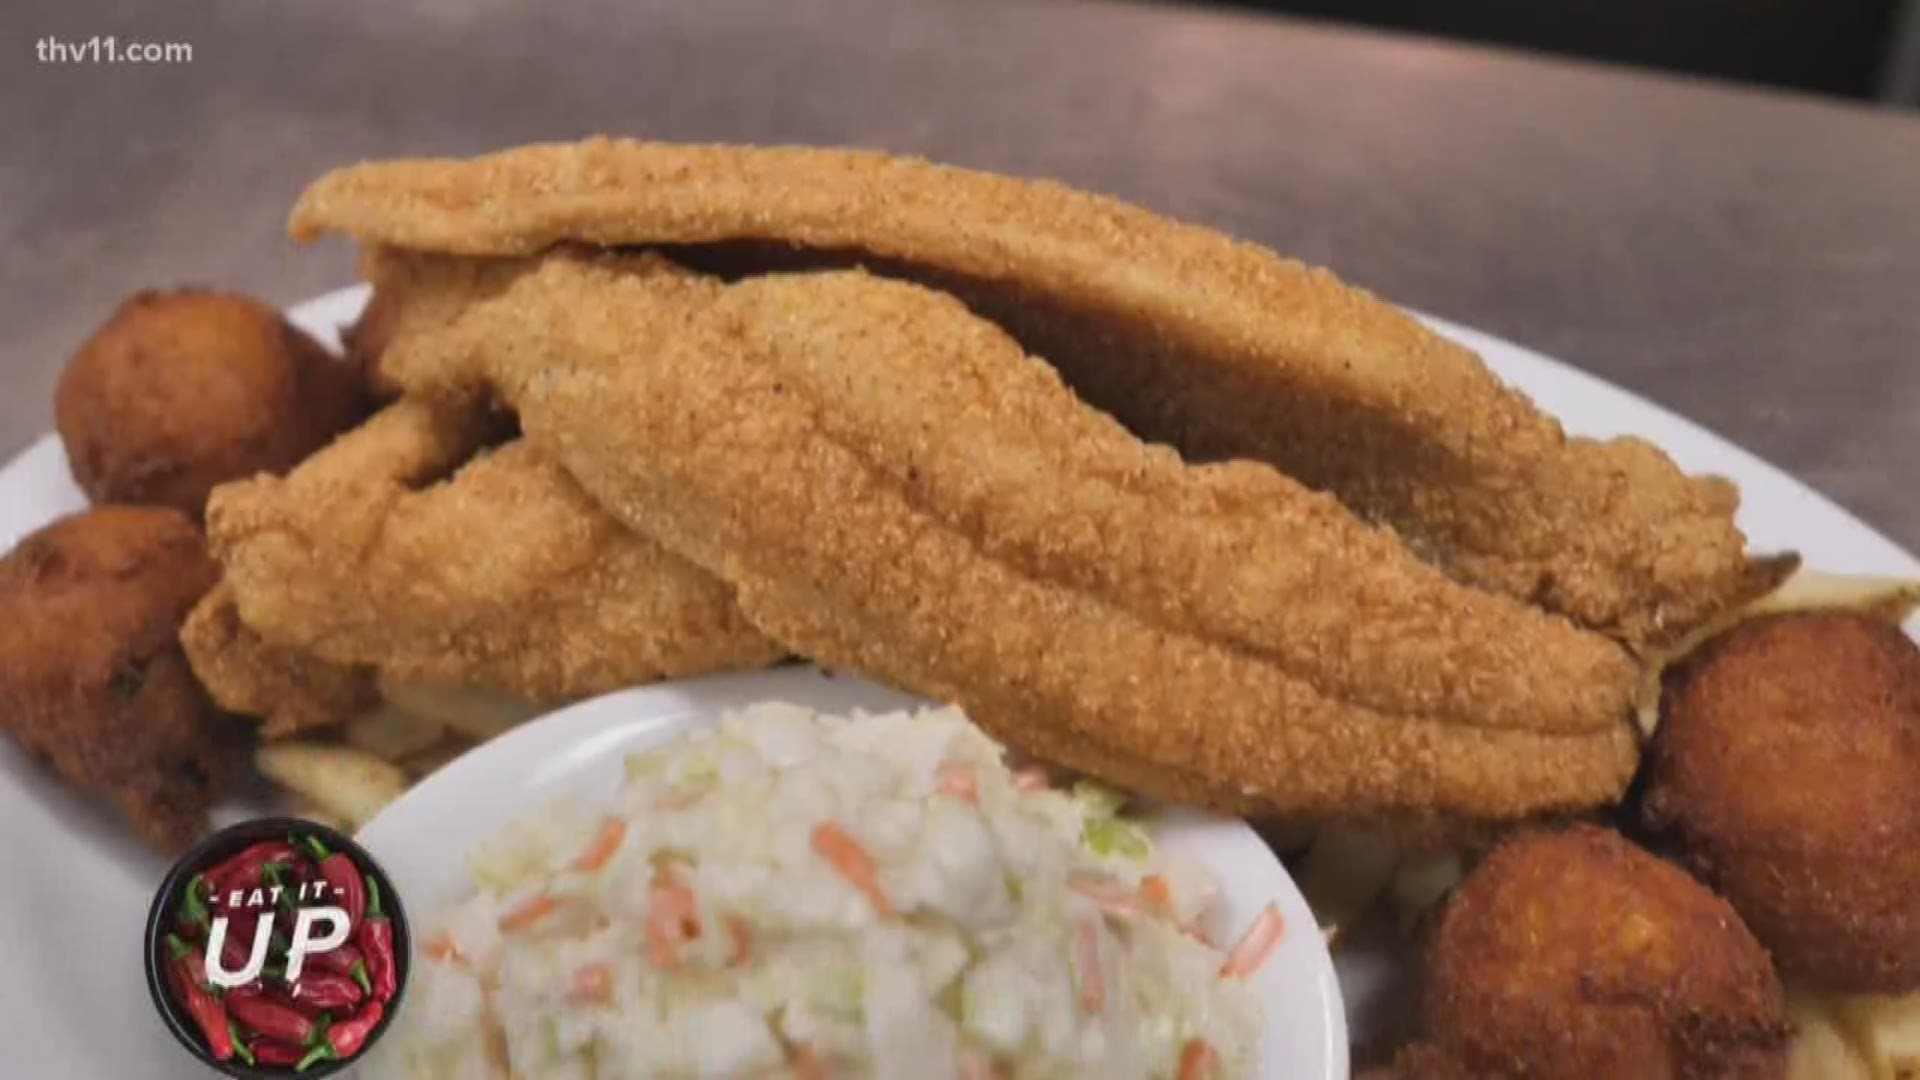 Soulfish got their notoriety in the community for their catfish. They have been voted best fried catfish in Little Rock by local publications.